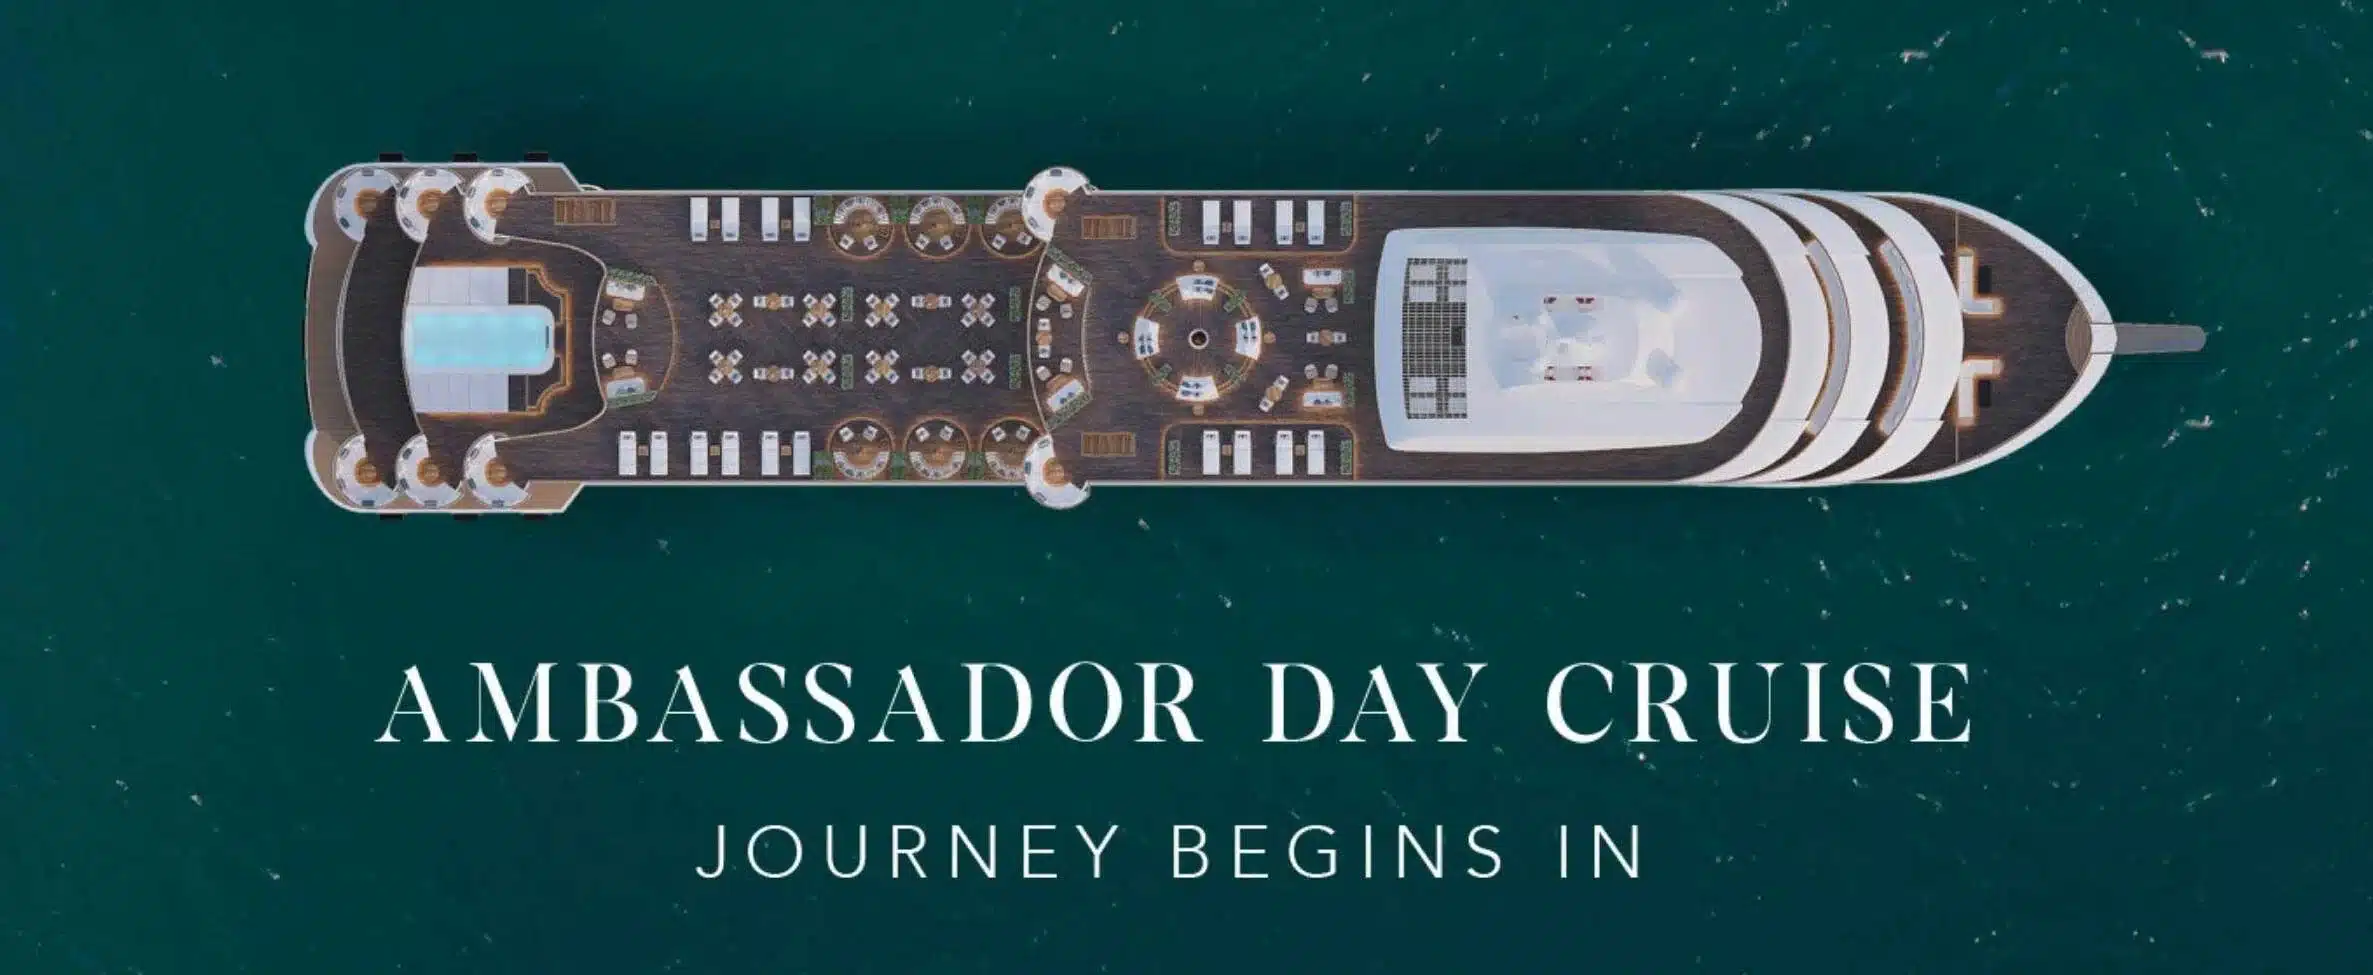 Ambassador Day Cruise: The most luxurious day cruise in Halong Bay